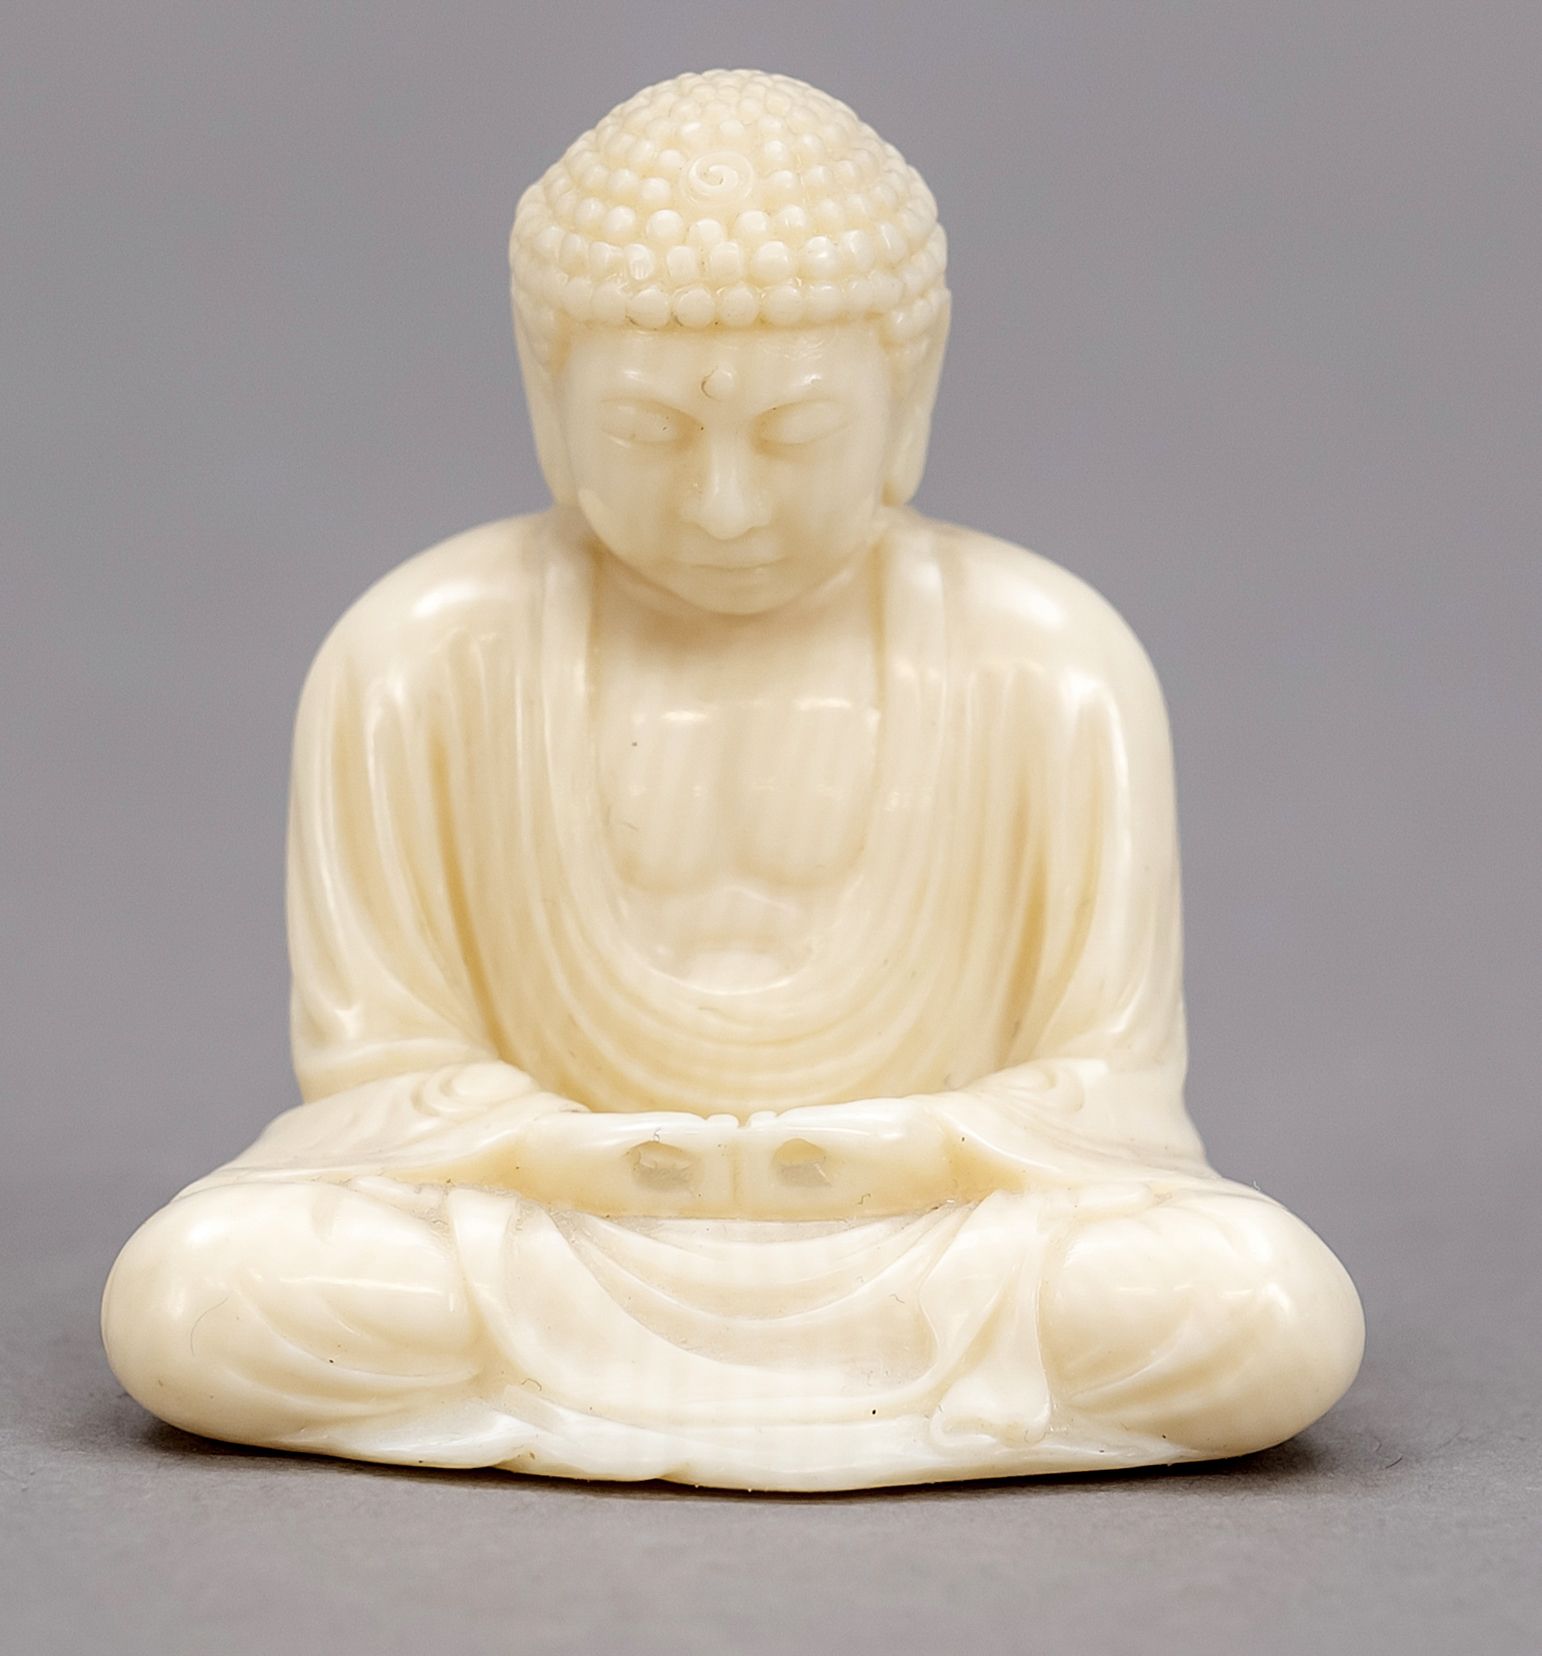 Null Small Buddha figure, China/Japan, c. 1900. Very finely worked ivory carving&hellip;